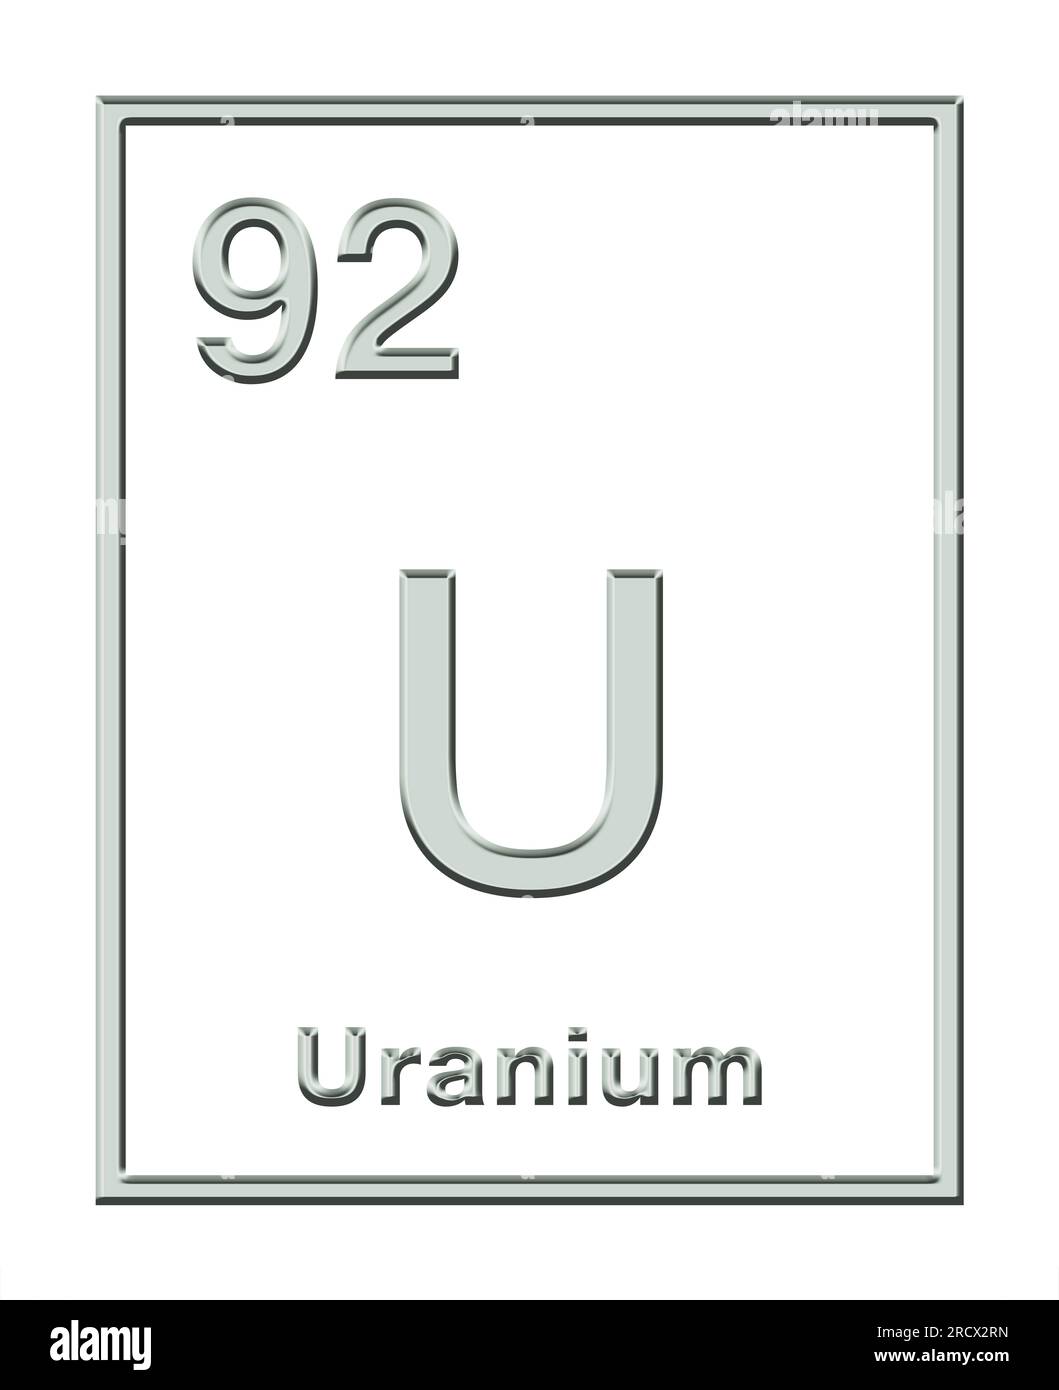 Uranium, chemical element, taken from periodic table, with relief shape. Radioactive metal with element symbol U and atomic number 92. Stock Photo